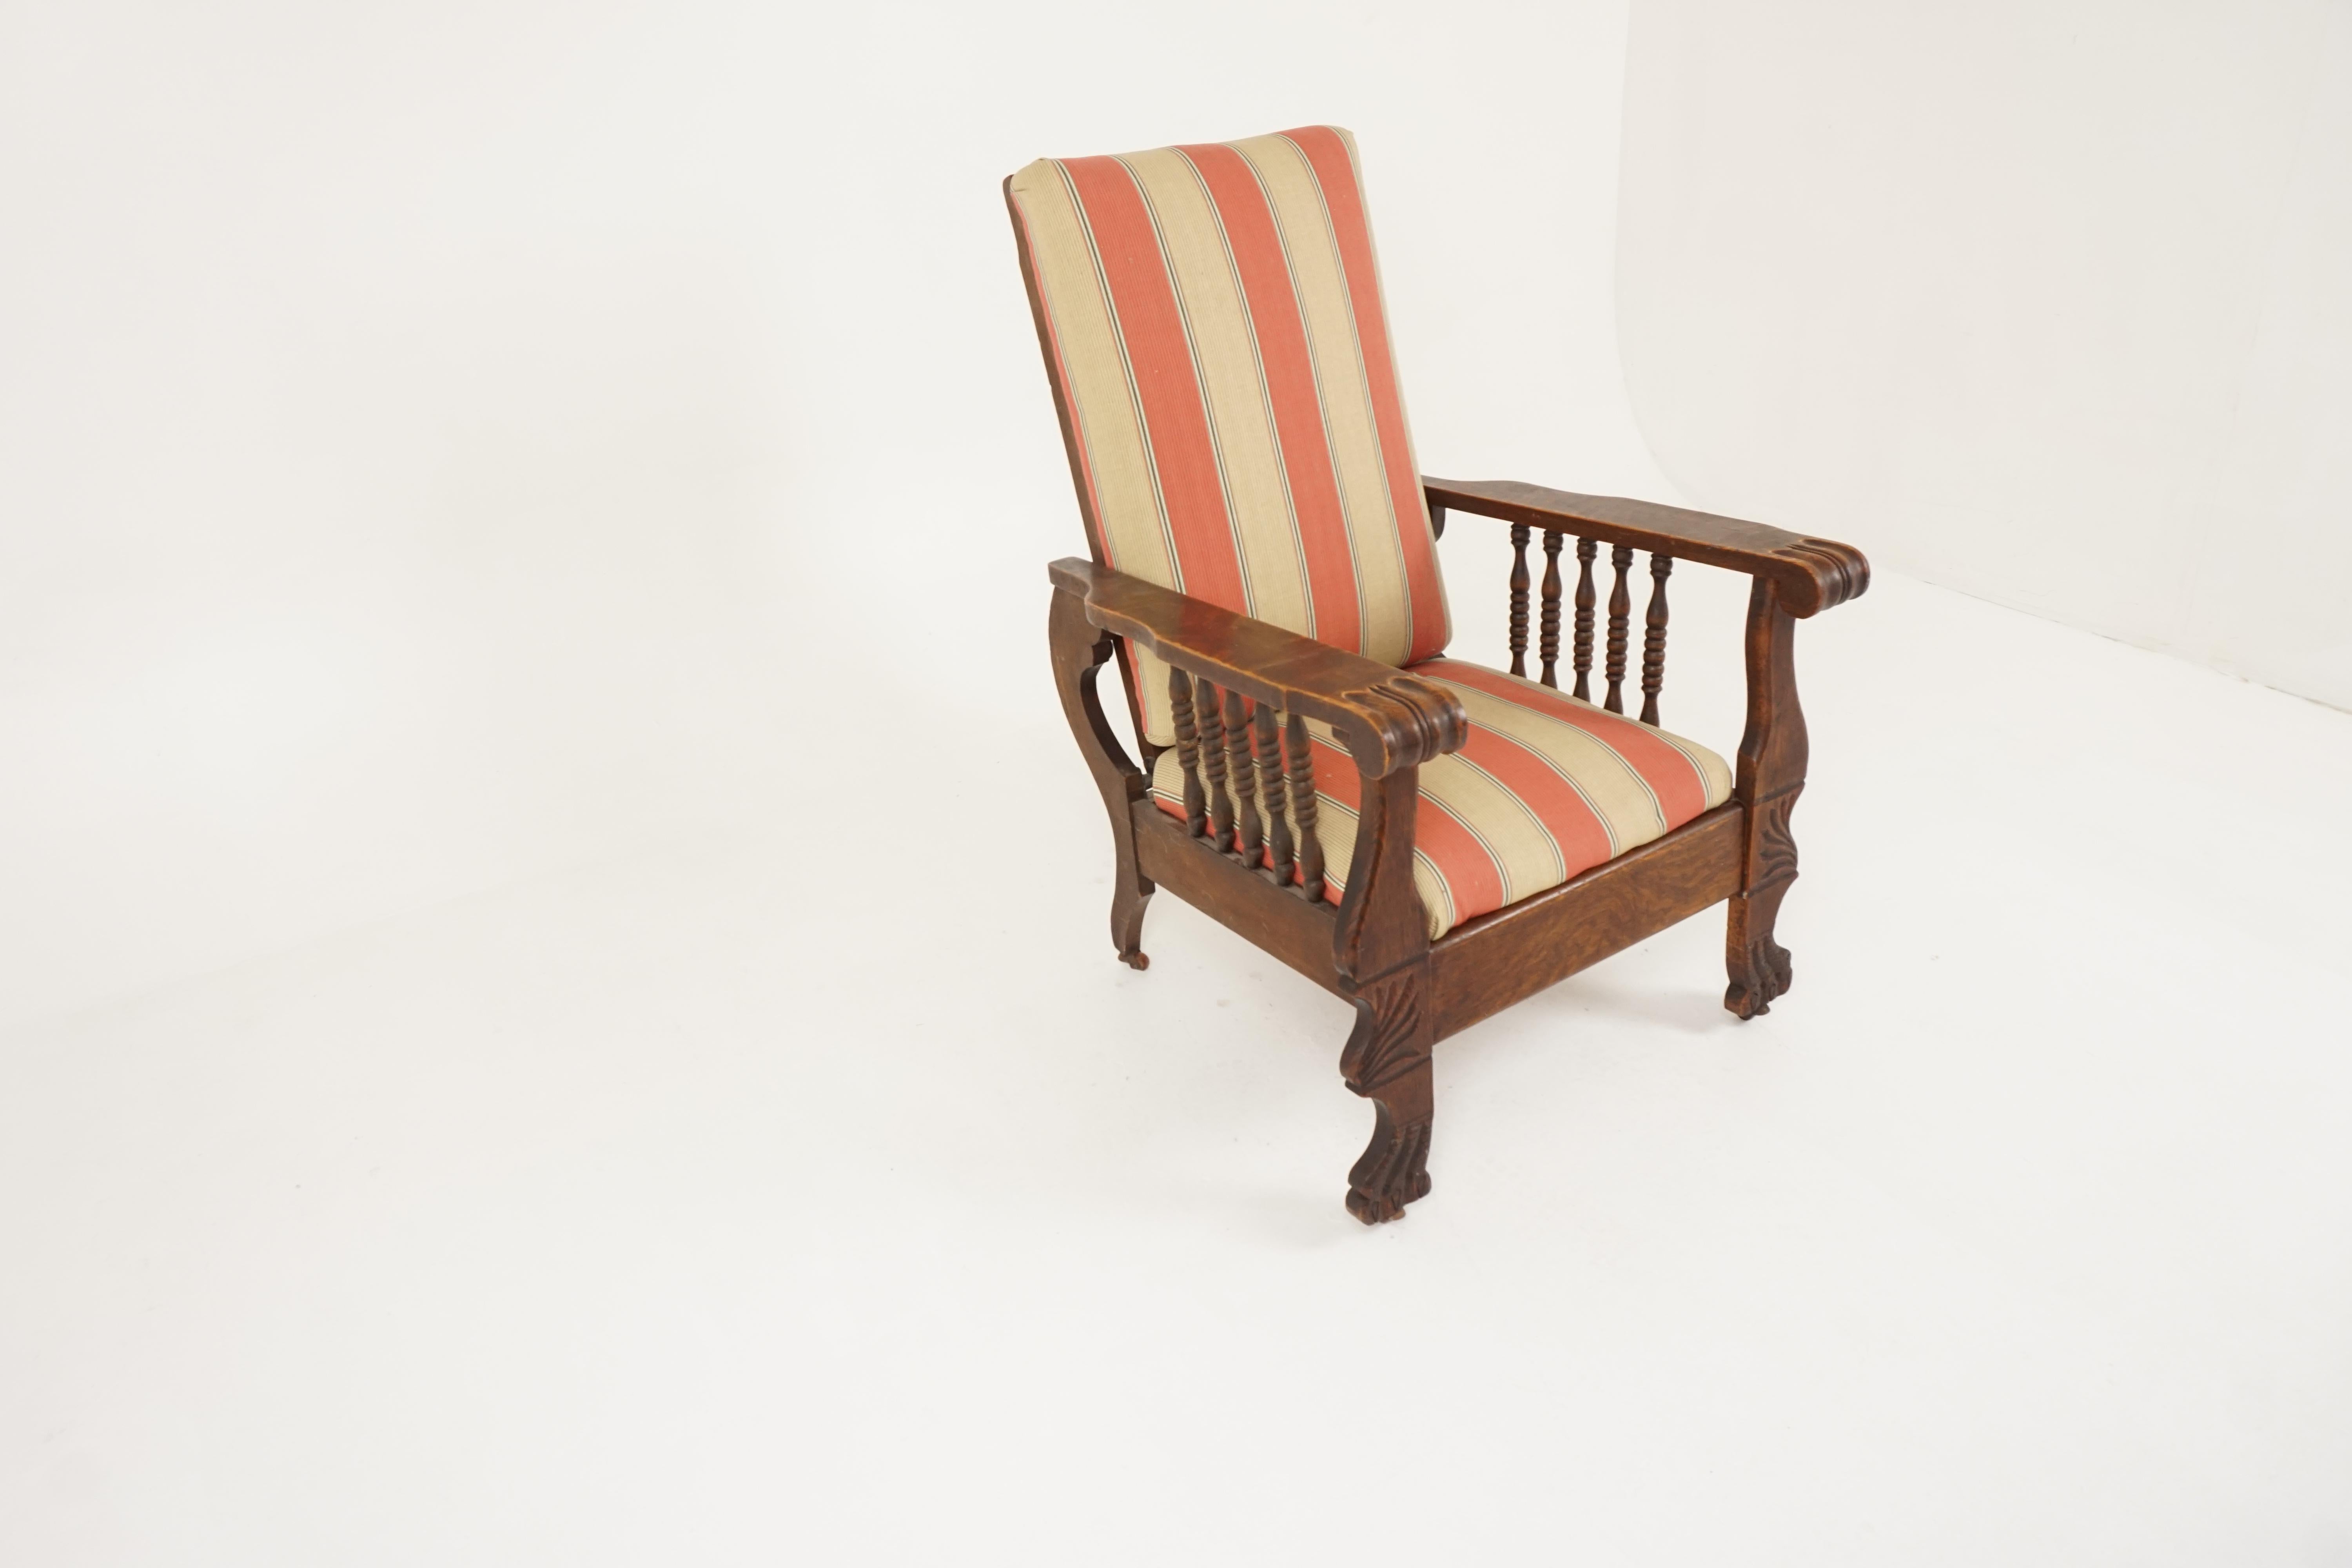 Antique tiger oak chair, reclining Morris chair, American 1920, B2320

American, 1920
Solid oak
Original Finish
With detail on arms and feet spindle sides
Upholstered back and seat
The back recliner has four positions
All standing on